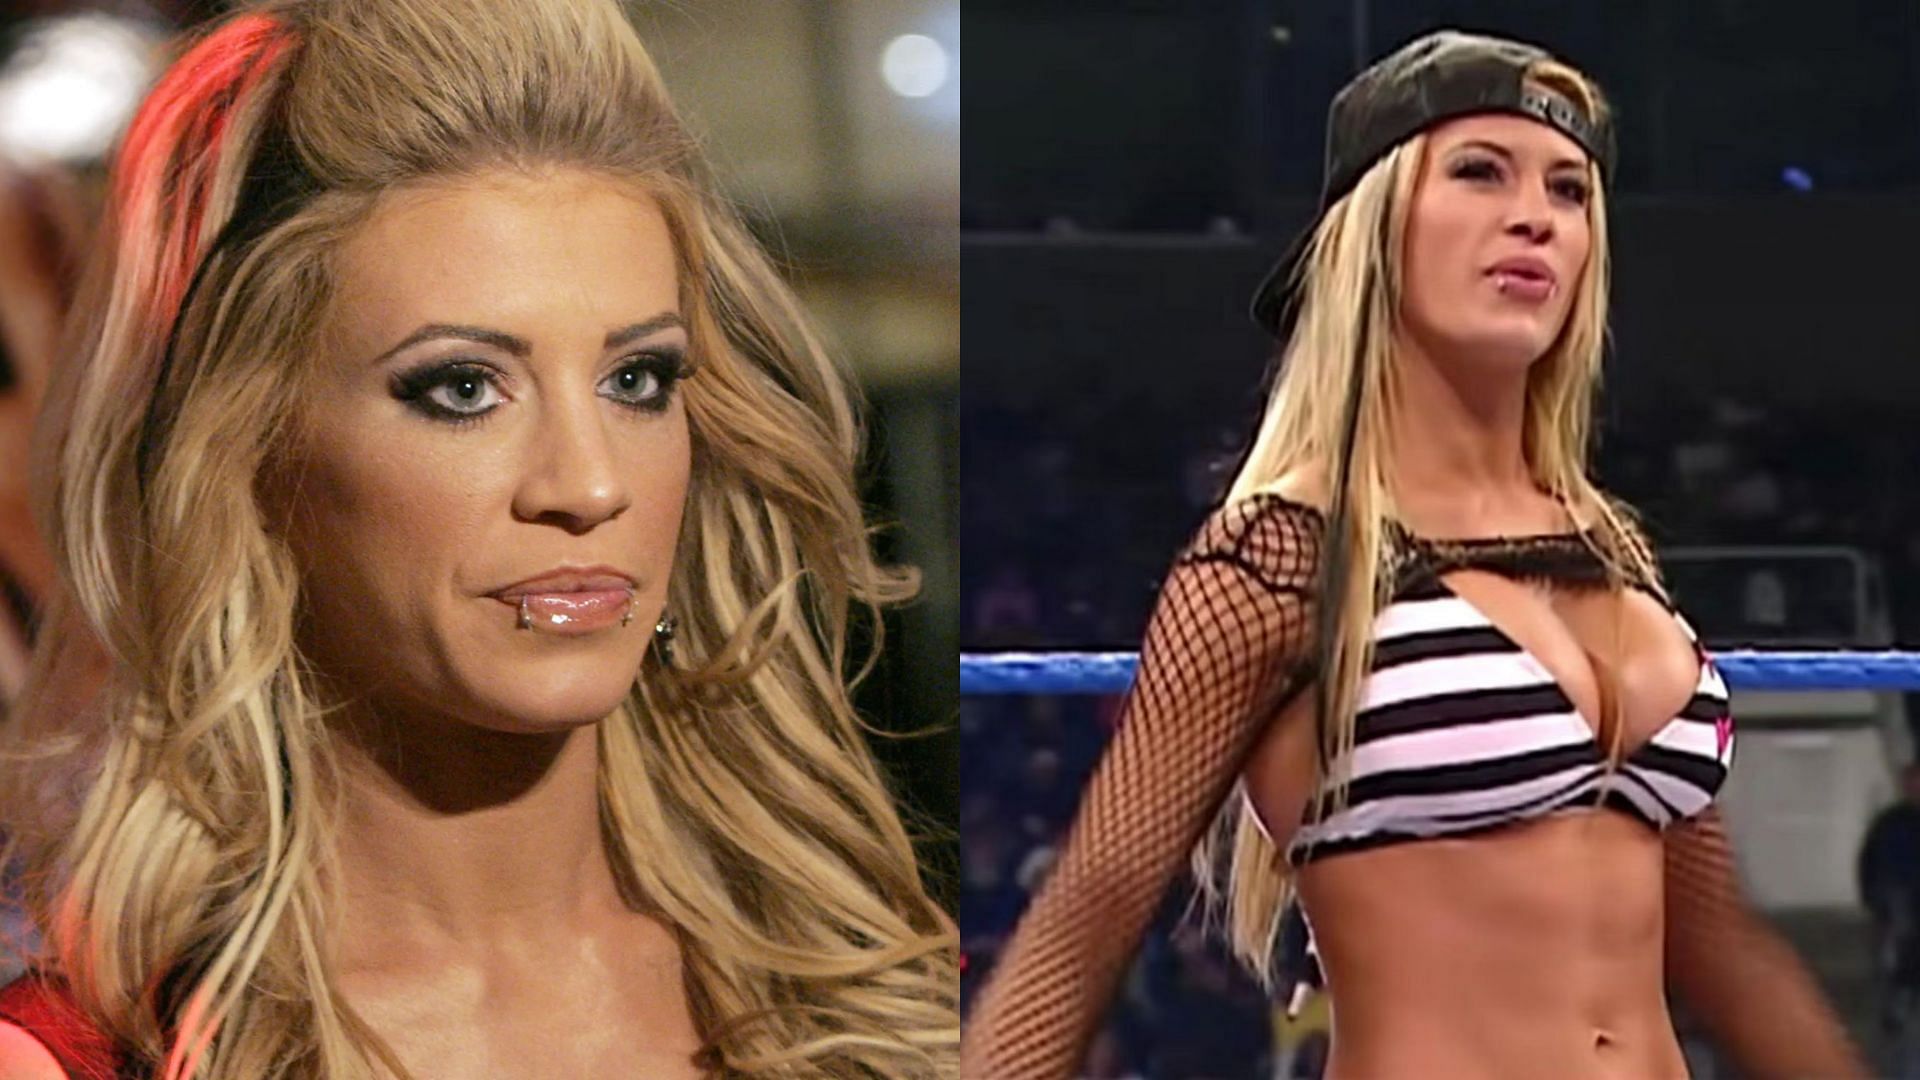 Ashley Massaro was in a relationship with Paul London during her stint in WWE